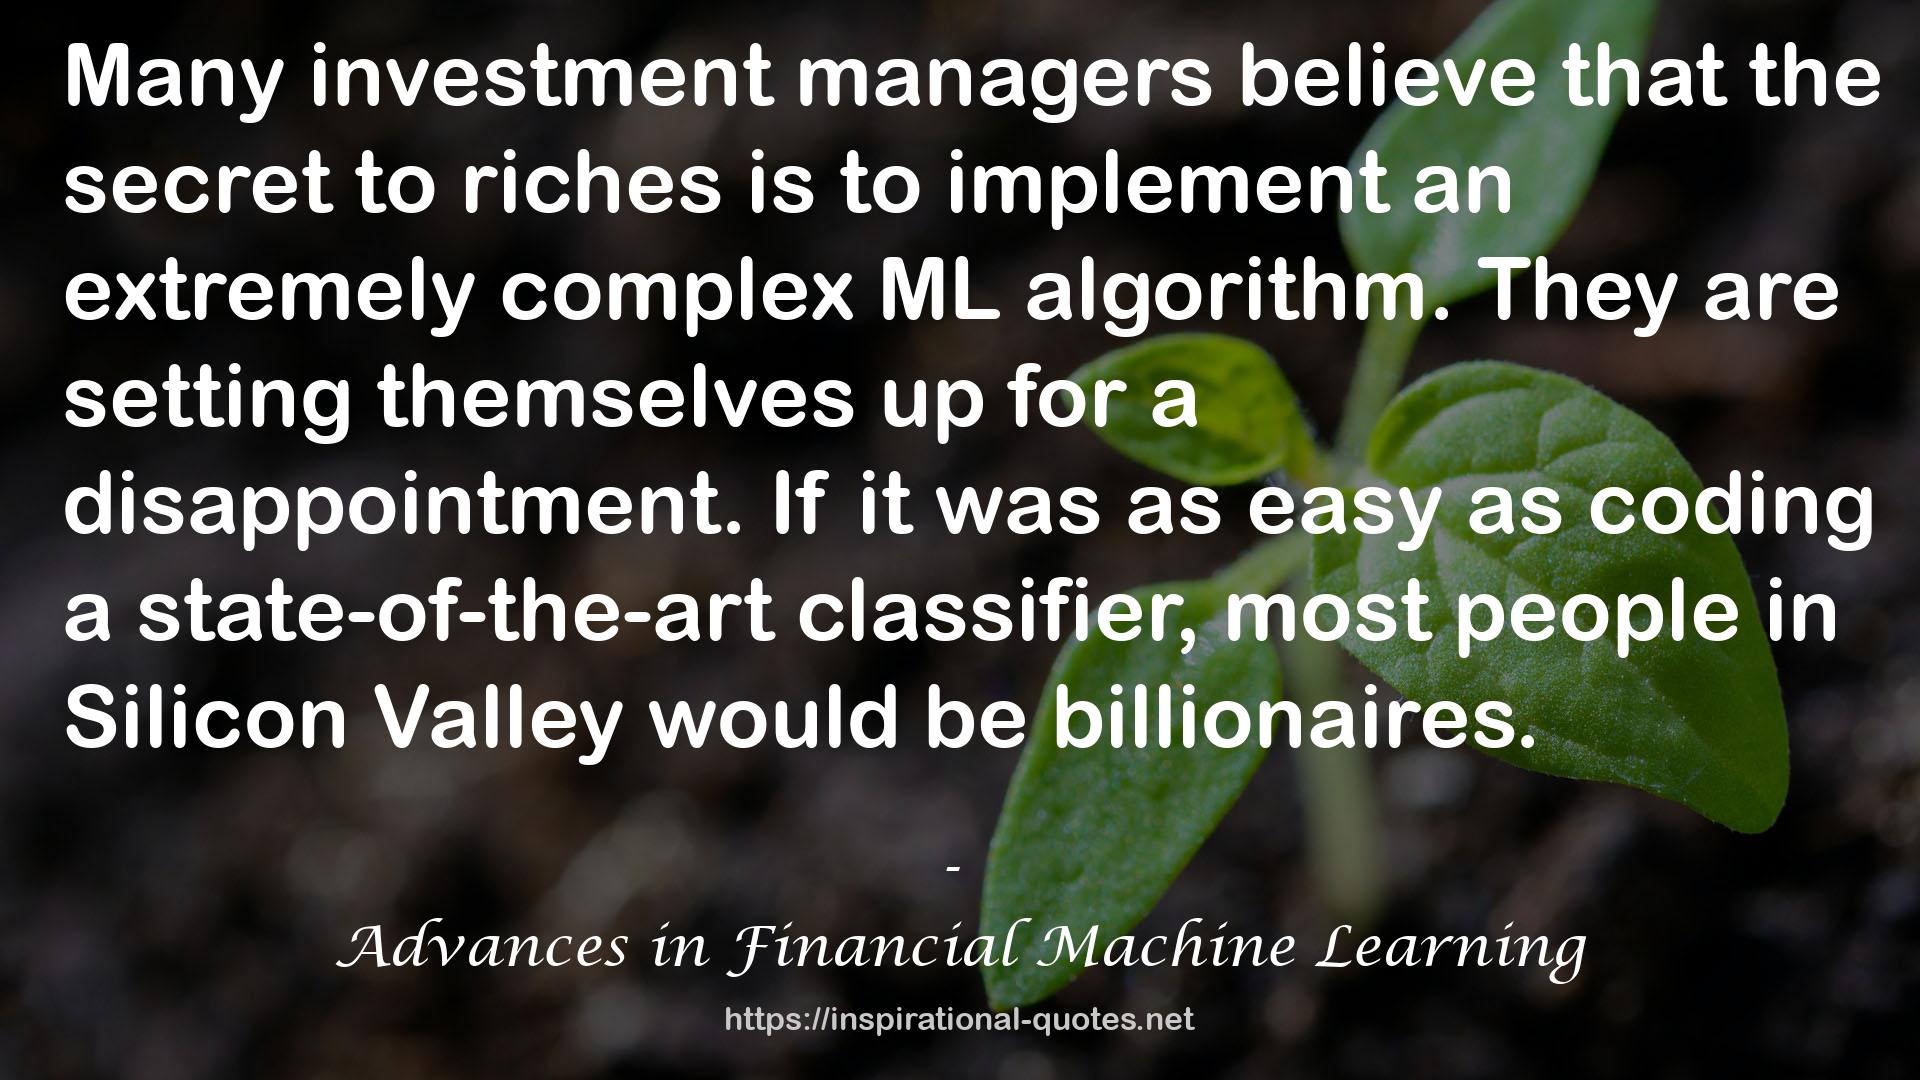 Advances in Financial Machine Learning QUOTES